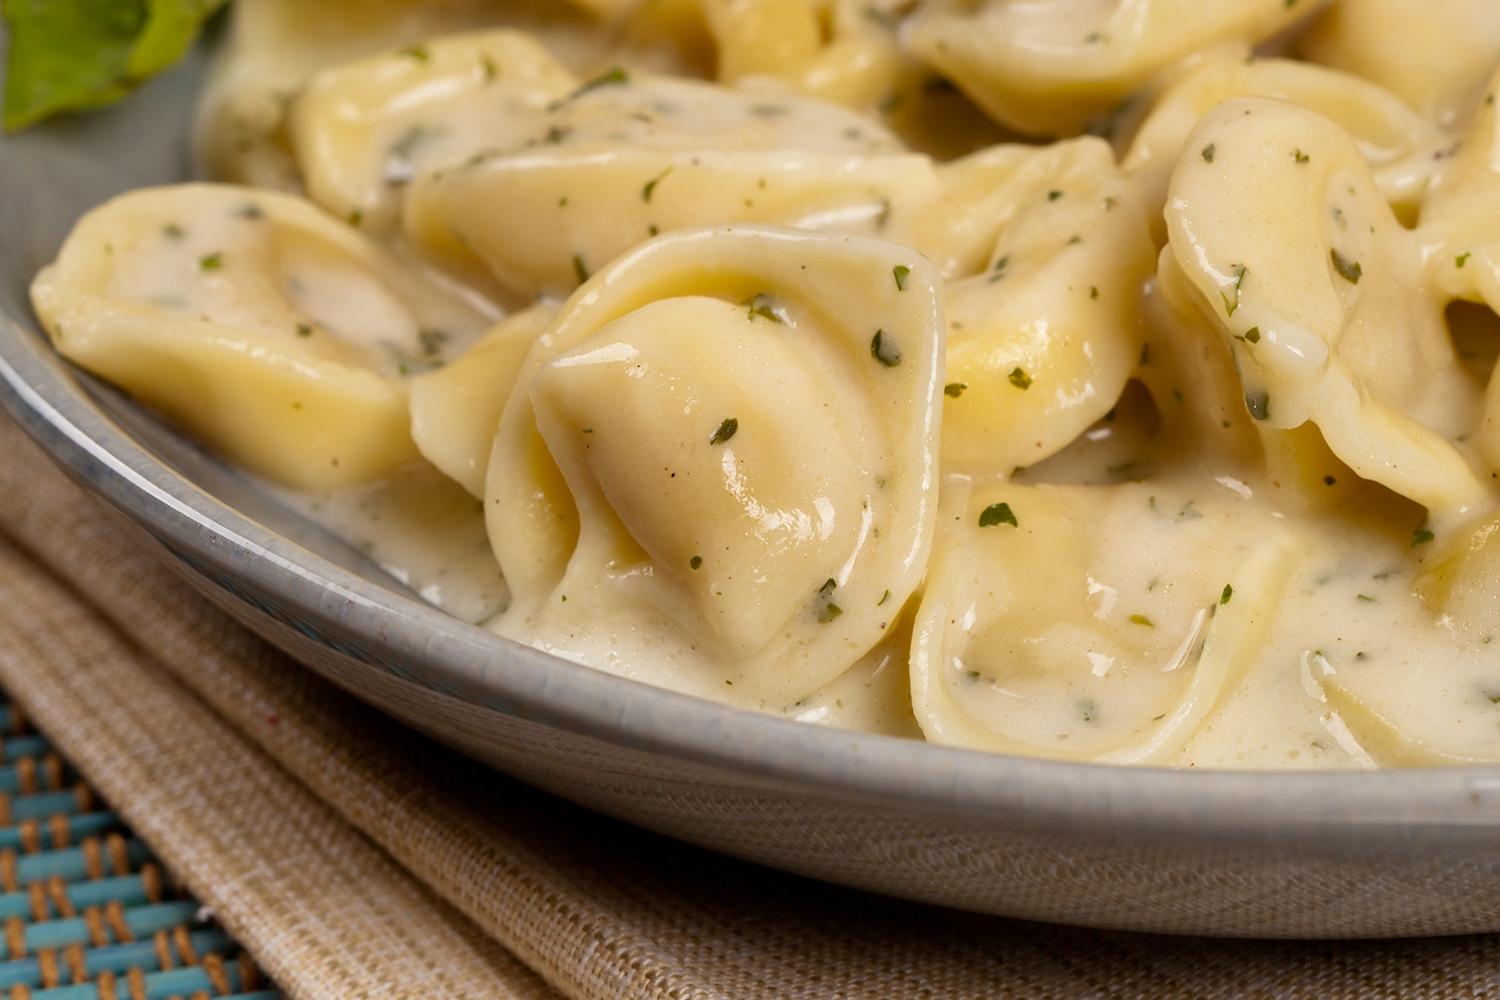 Blow your dinner guests away with homemade tortellini